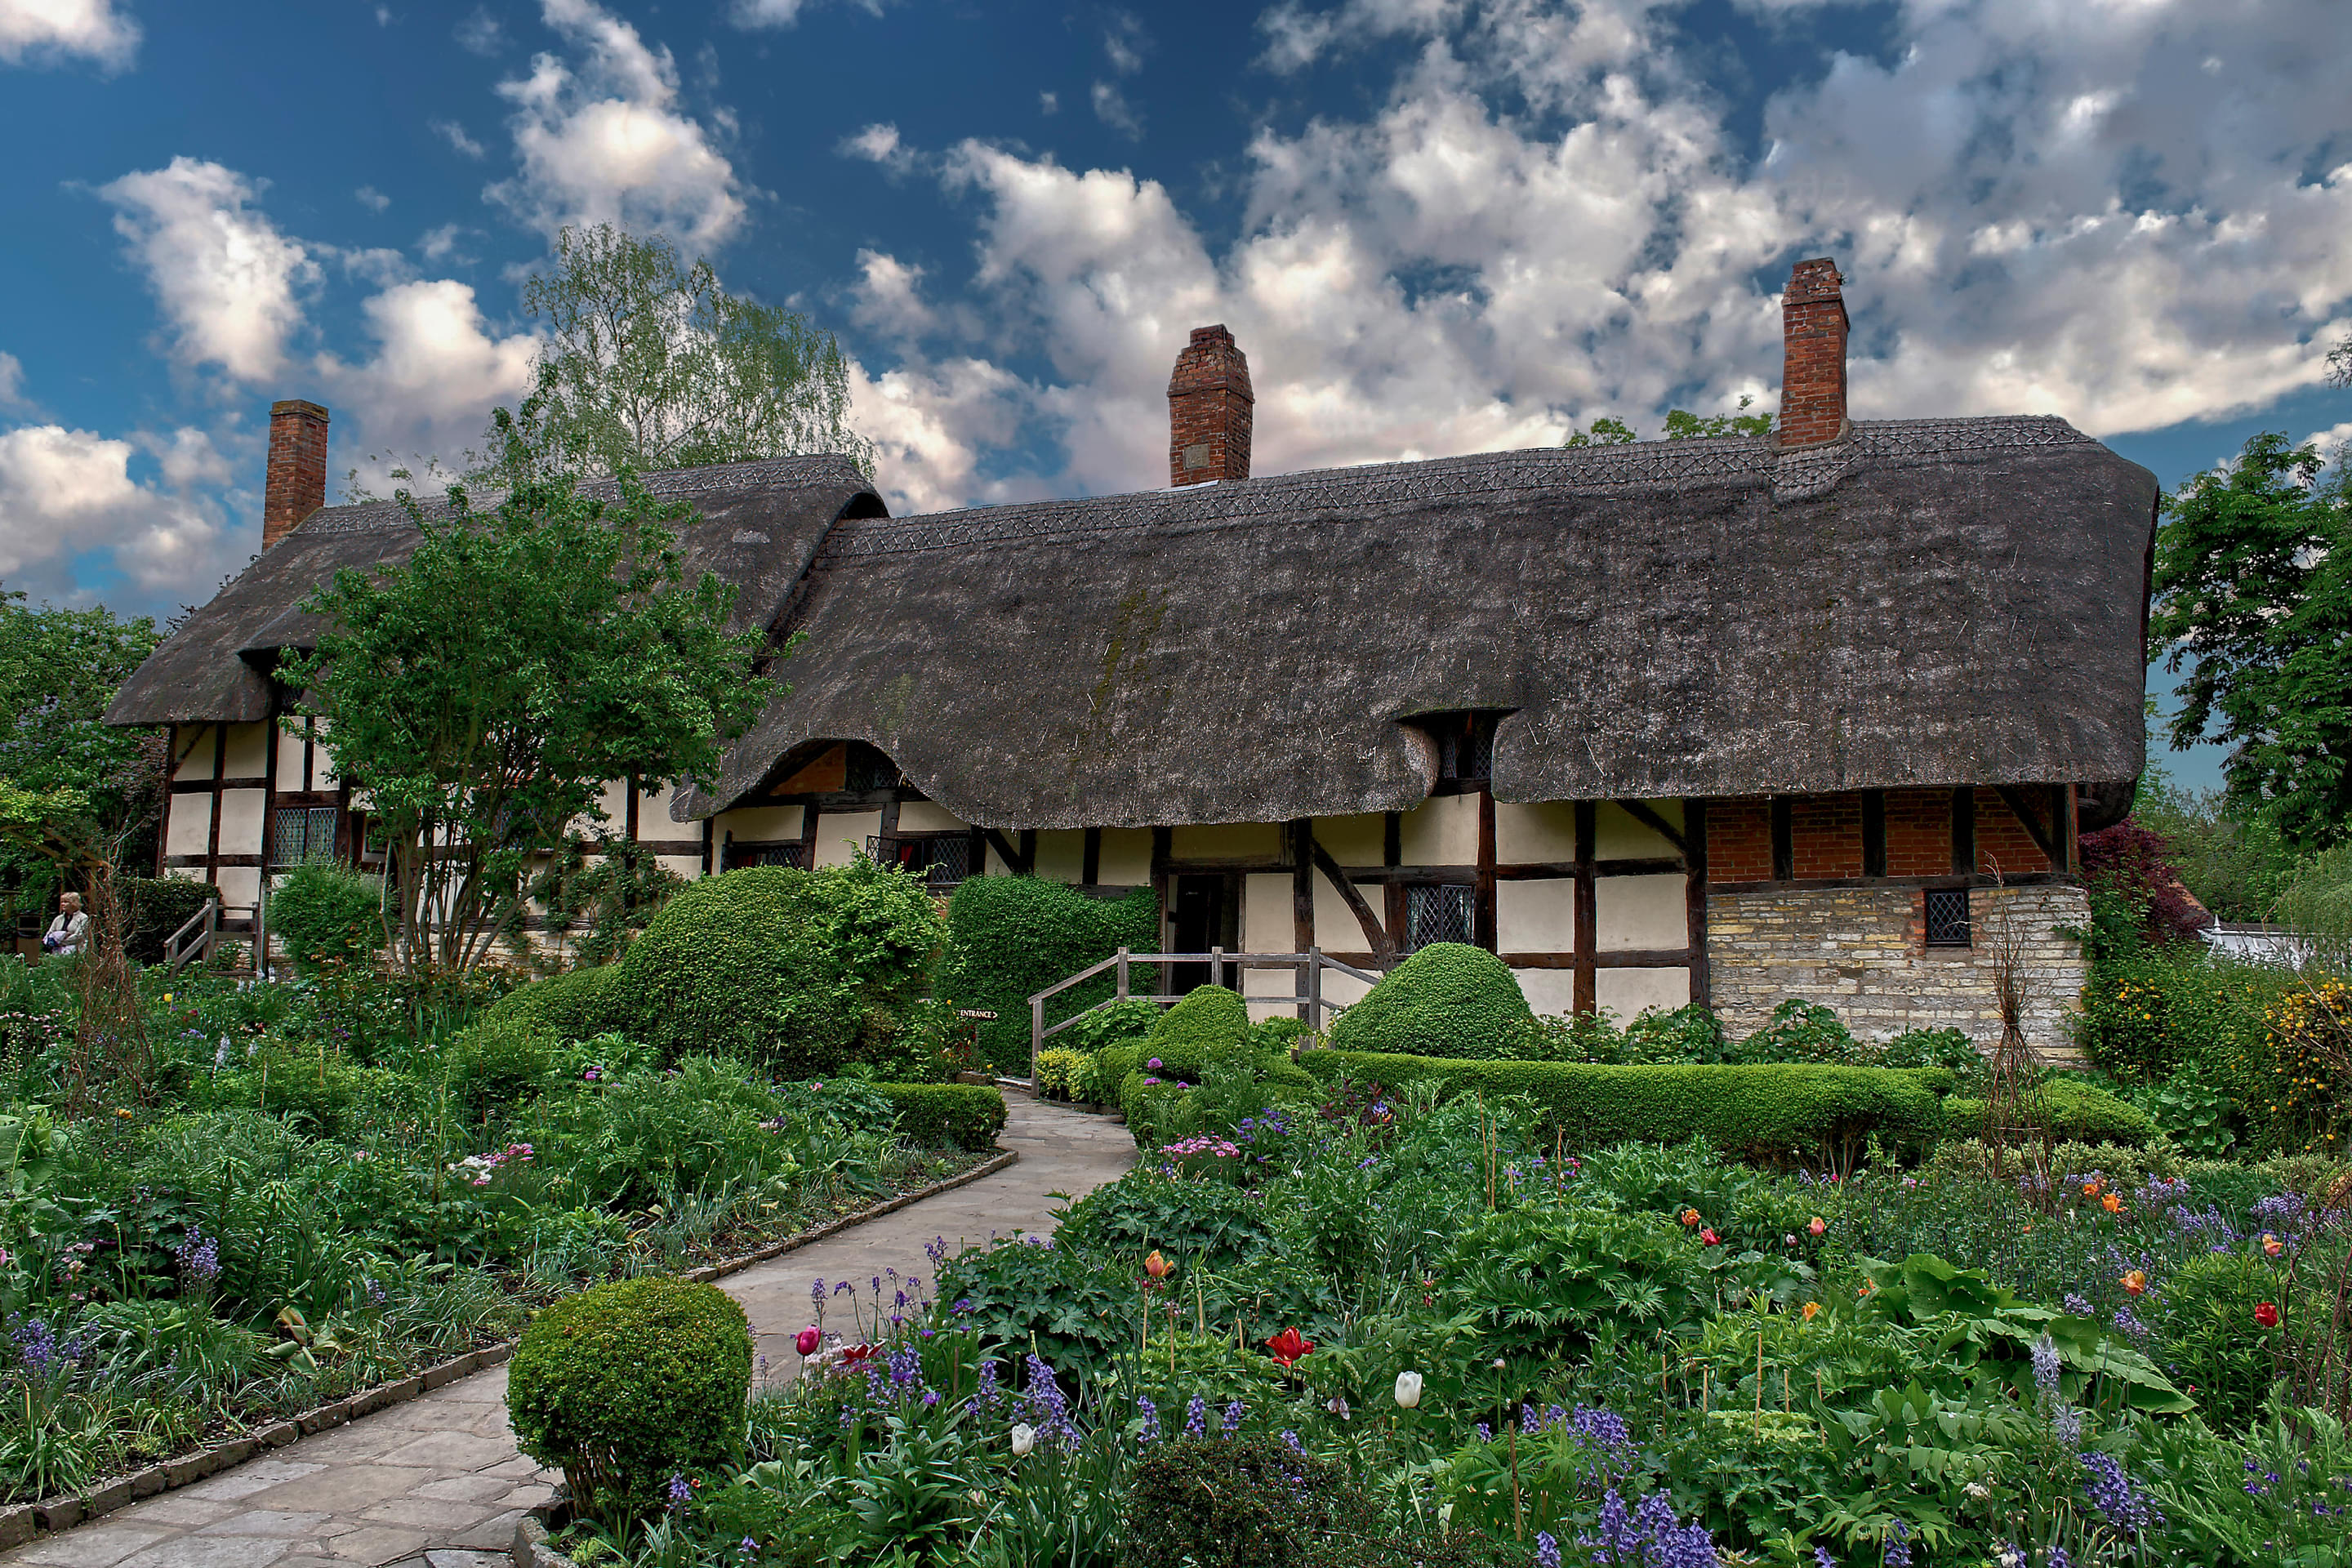 Anne Hathaway's Cottage Overview